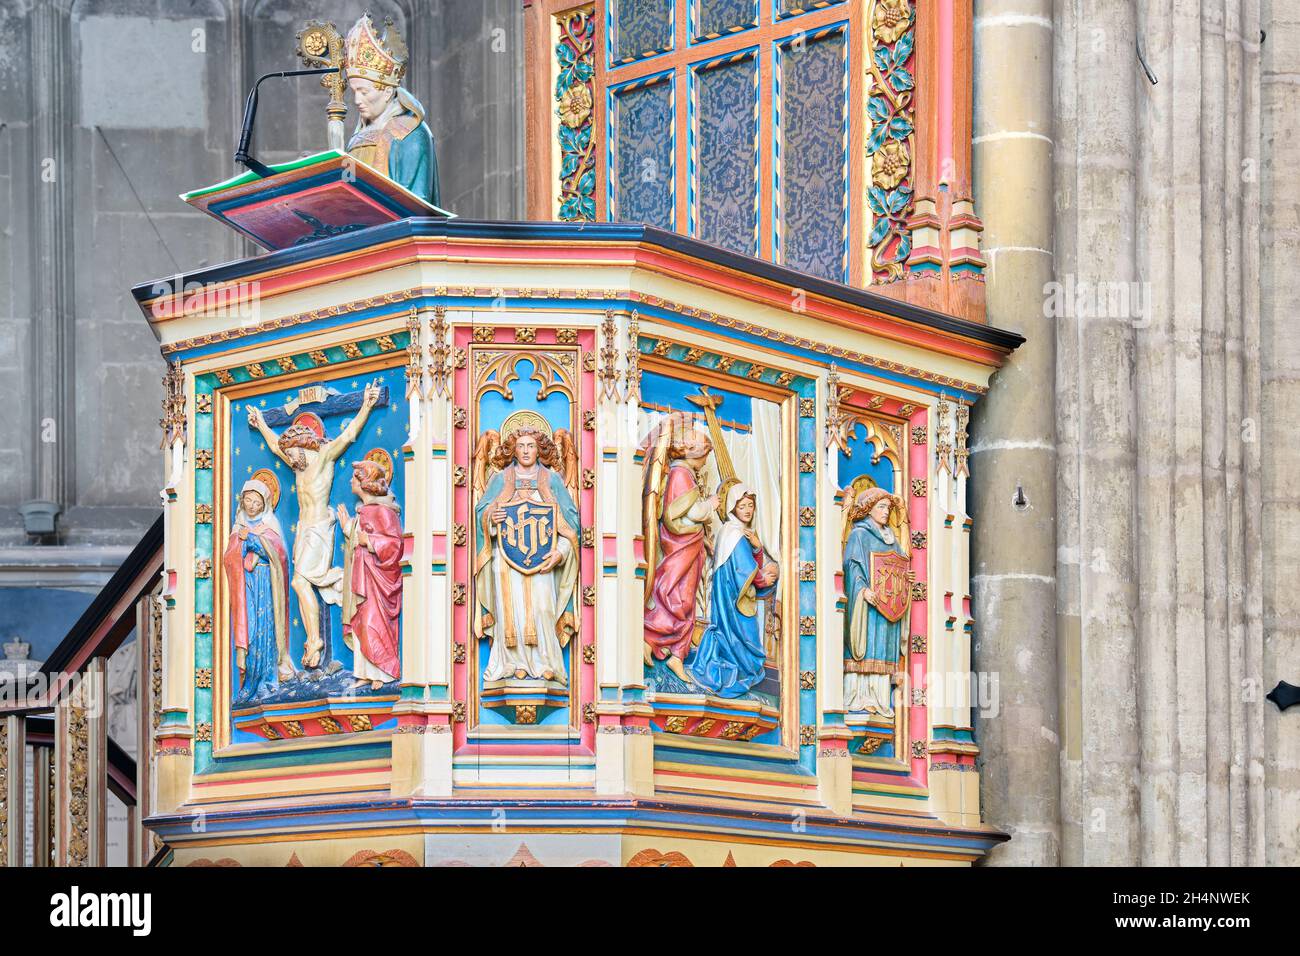 Ornate late 19th century painted pulpit in the cathedral at Canterbury, England. Stock Photo